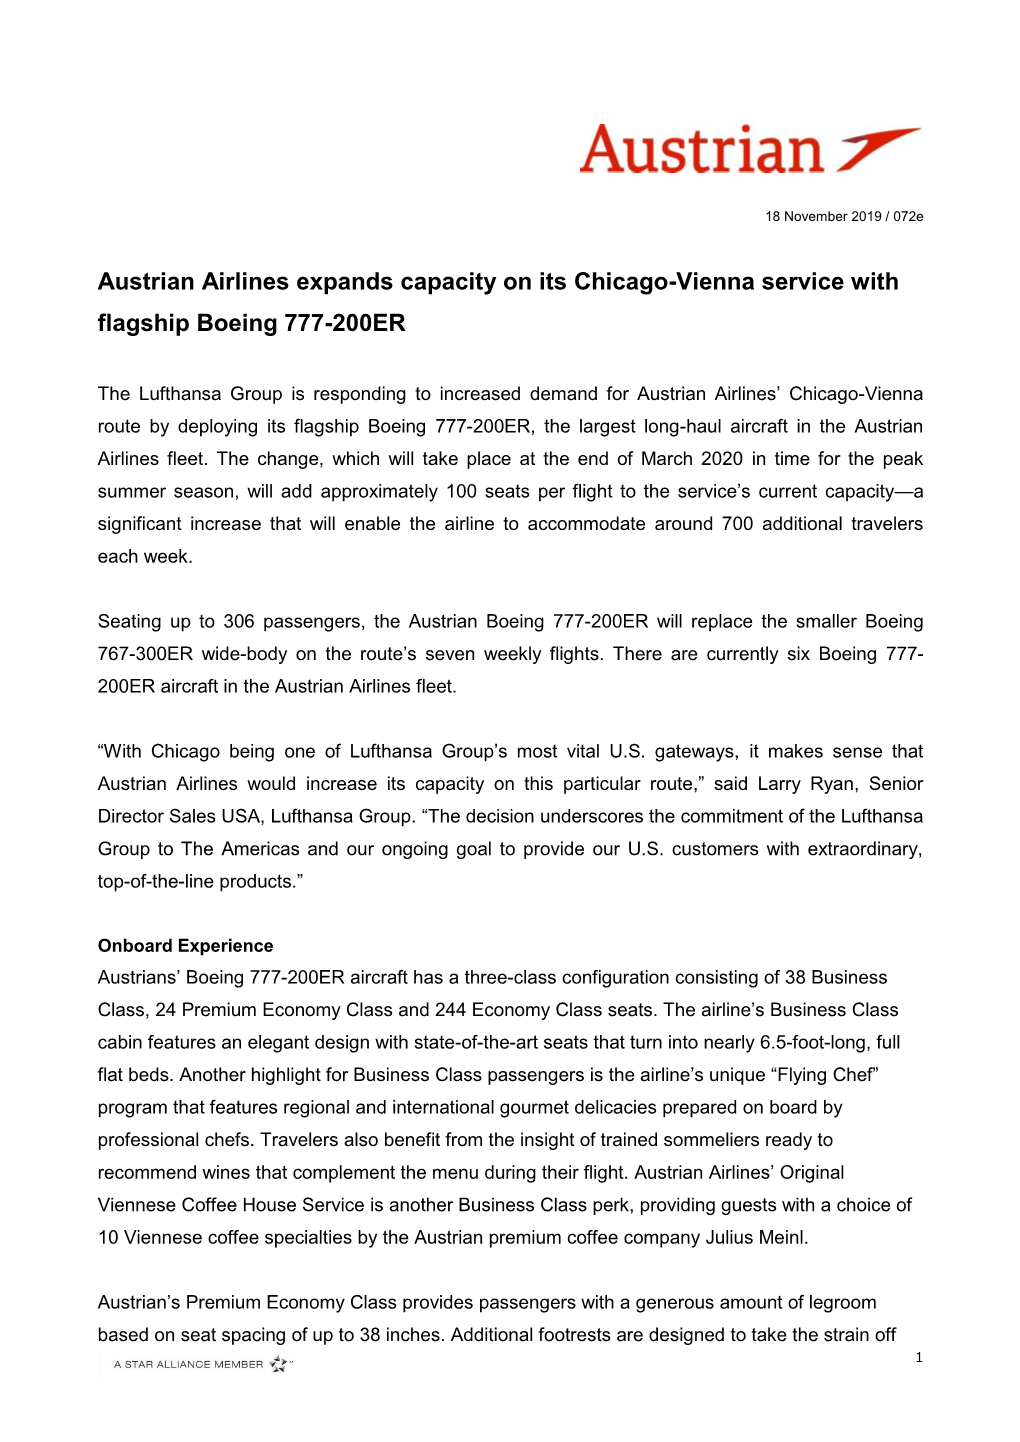 Austrian Airlines Expands Capacity on Its Chicago-Vienna Service with Flagship Boeing 777-200ER